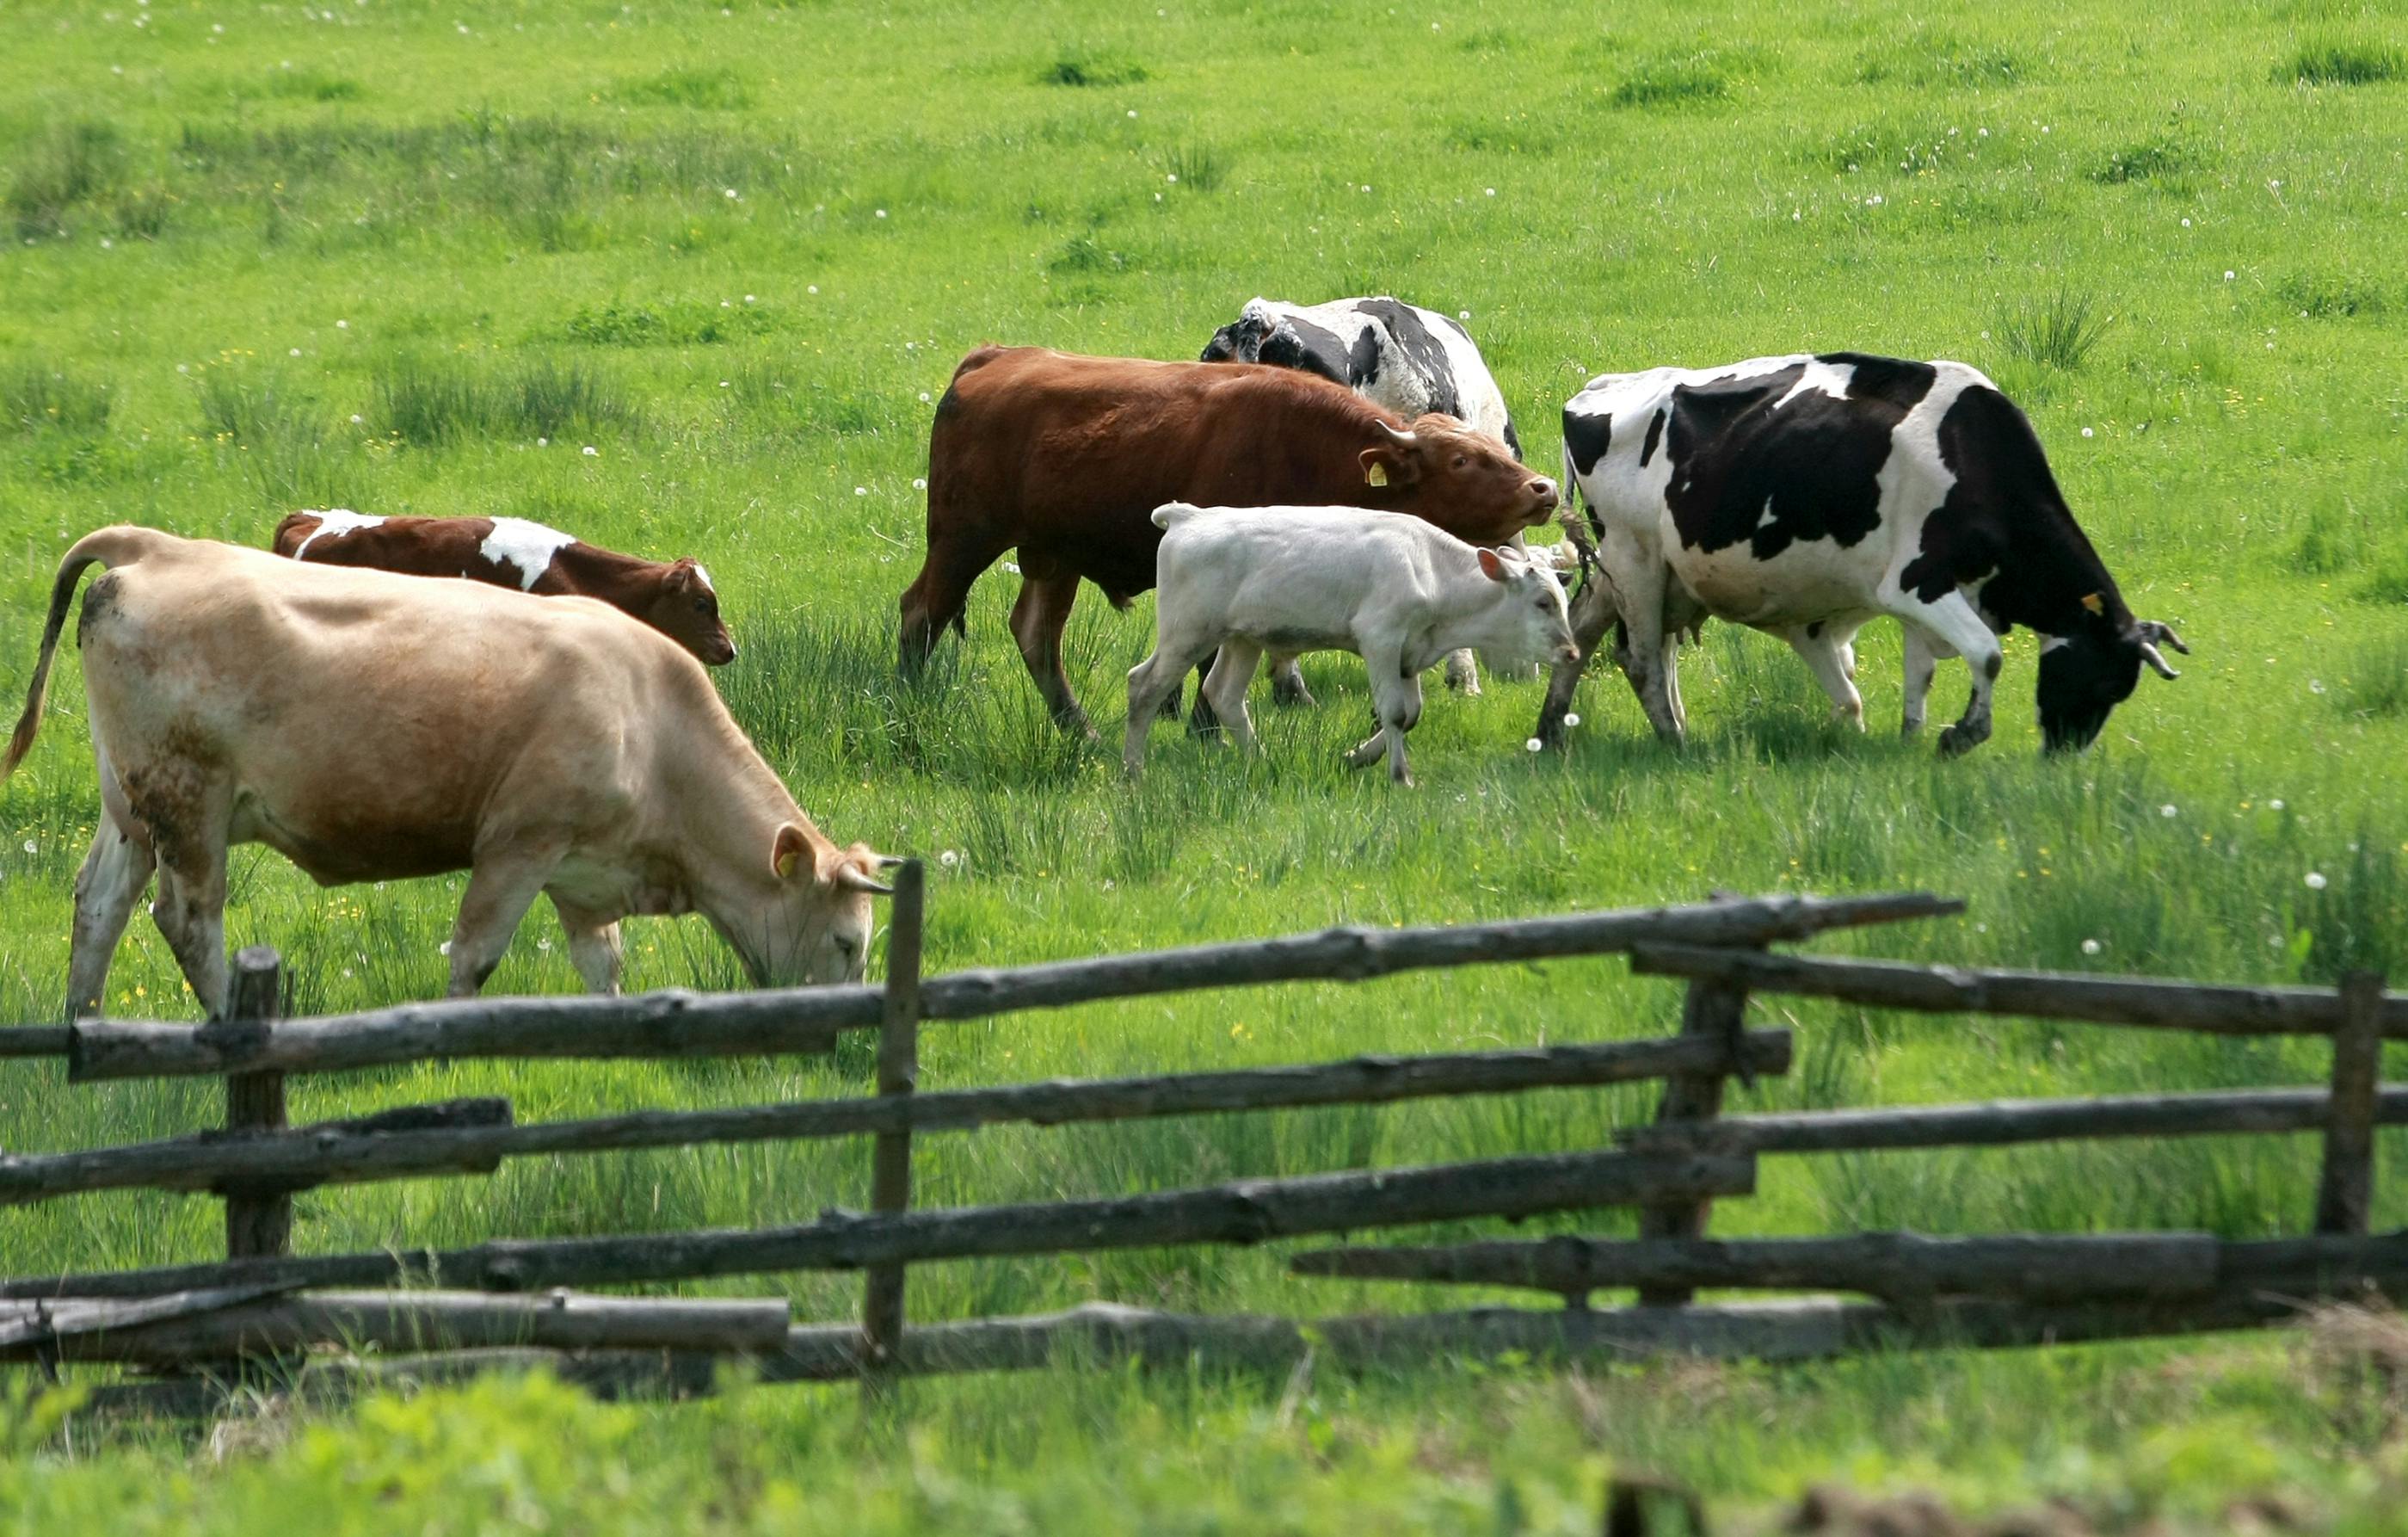 Cows grazing in a bright green, grassy pasture.